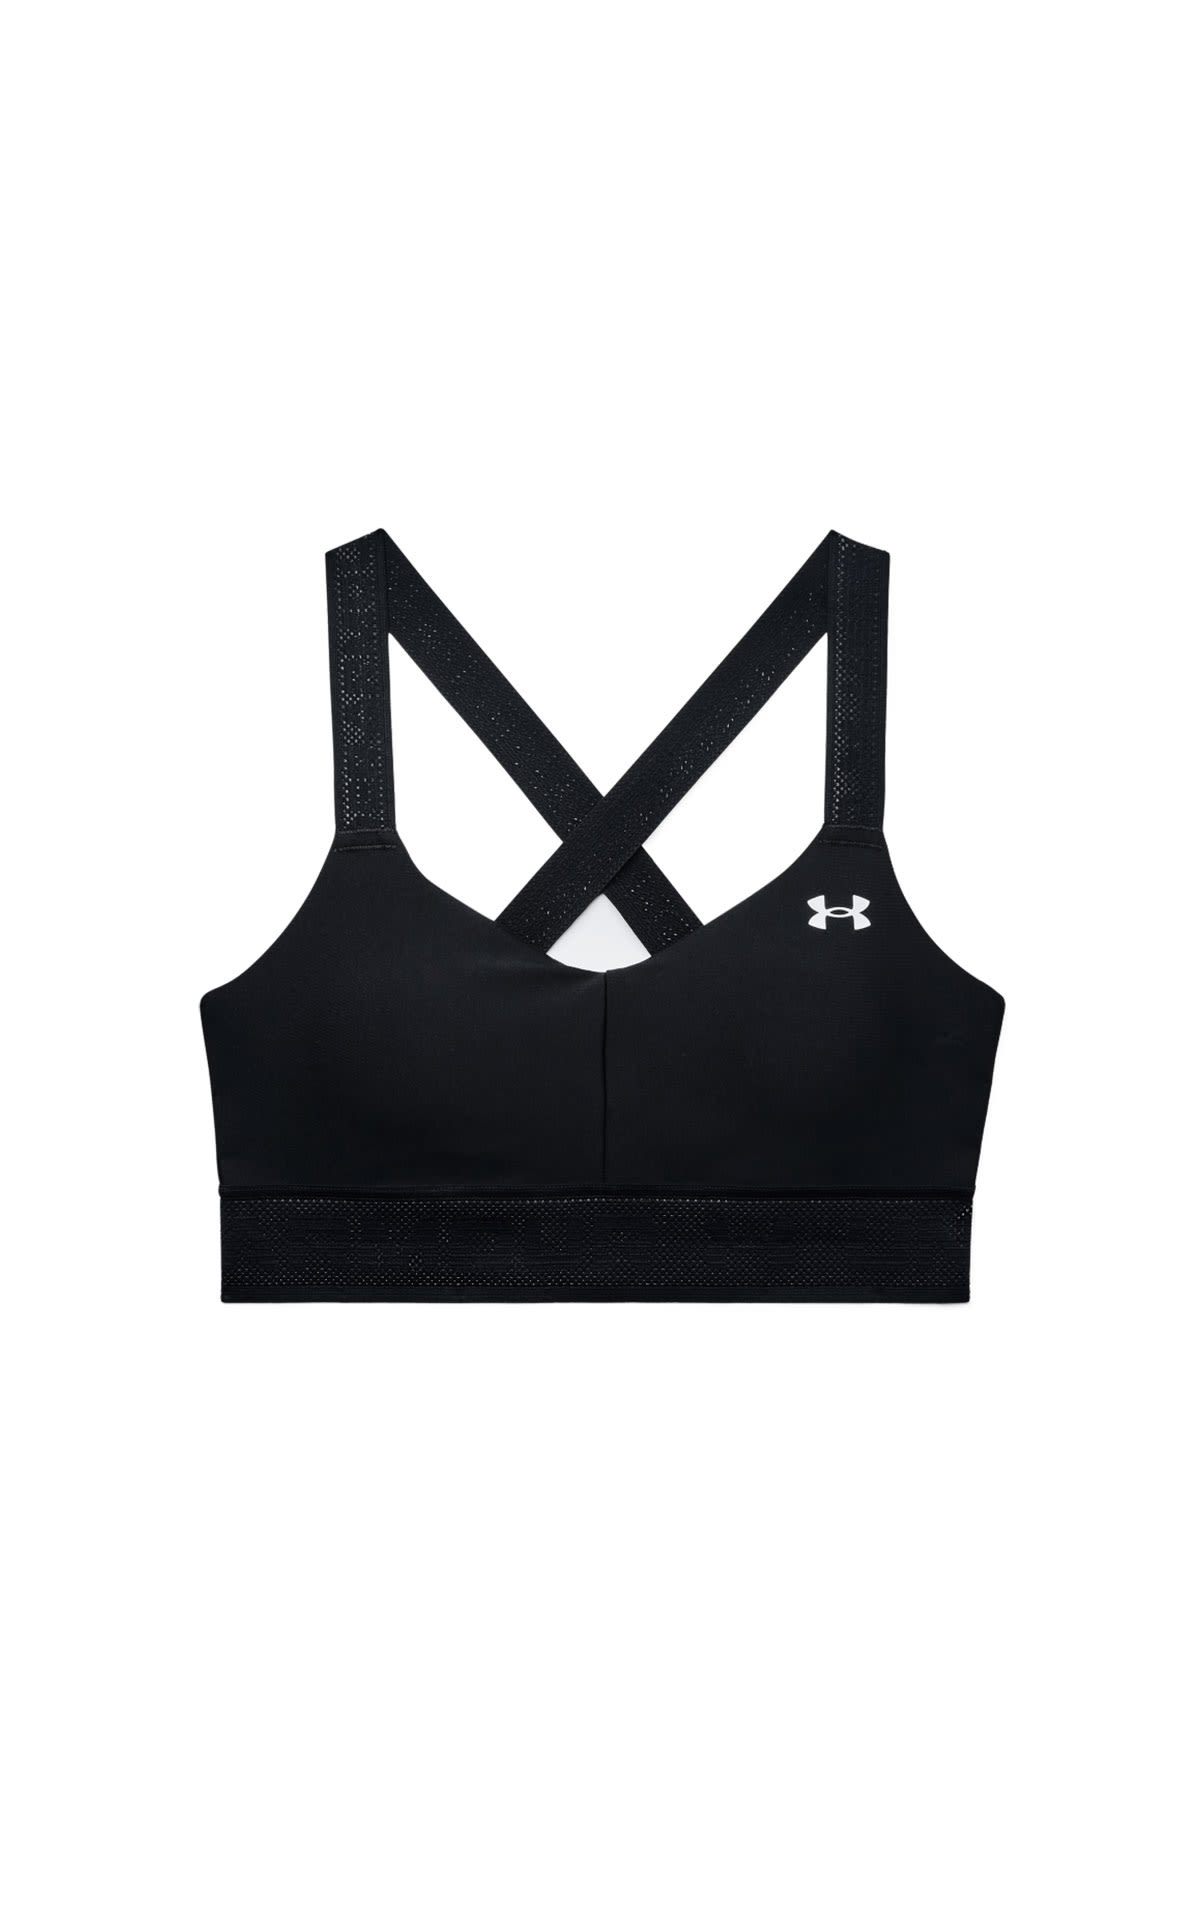 Black sports top Under Armour